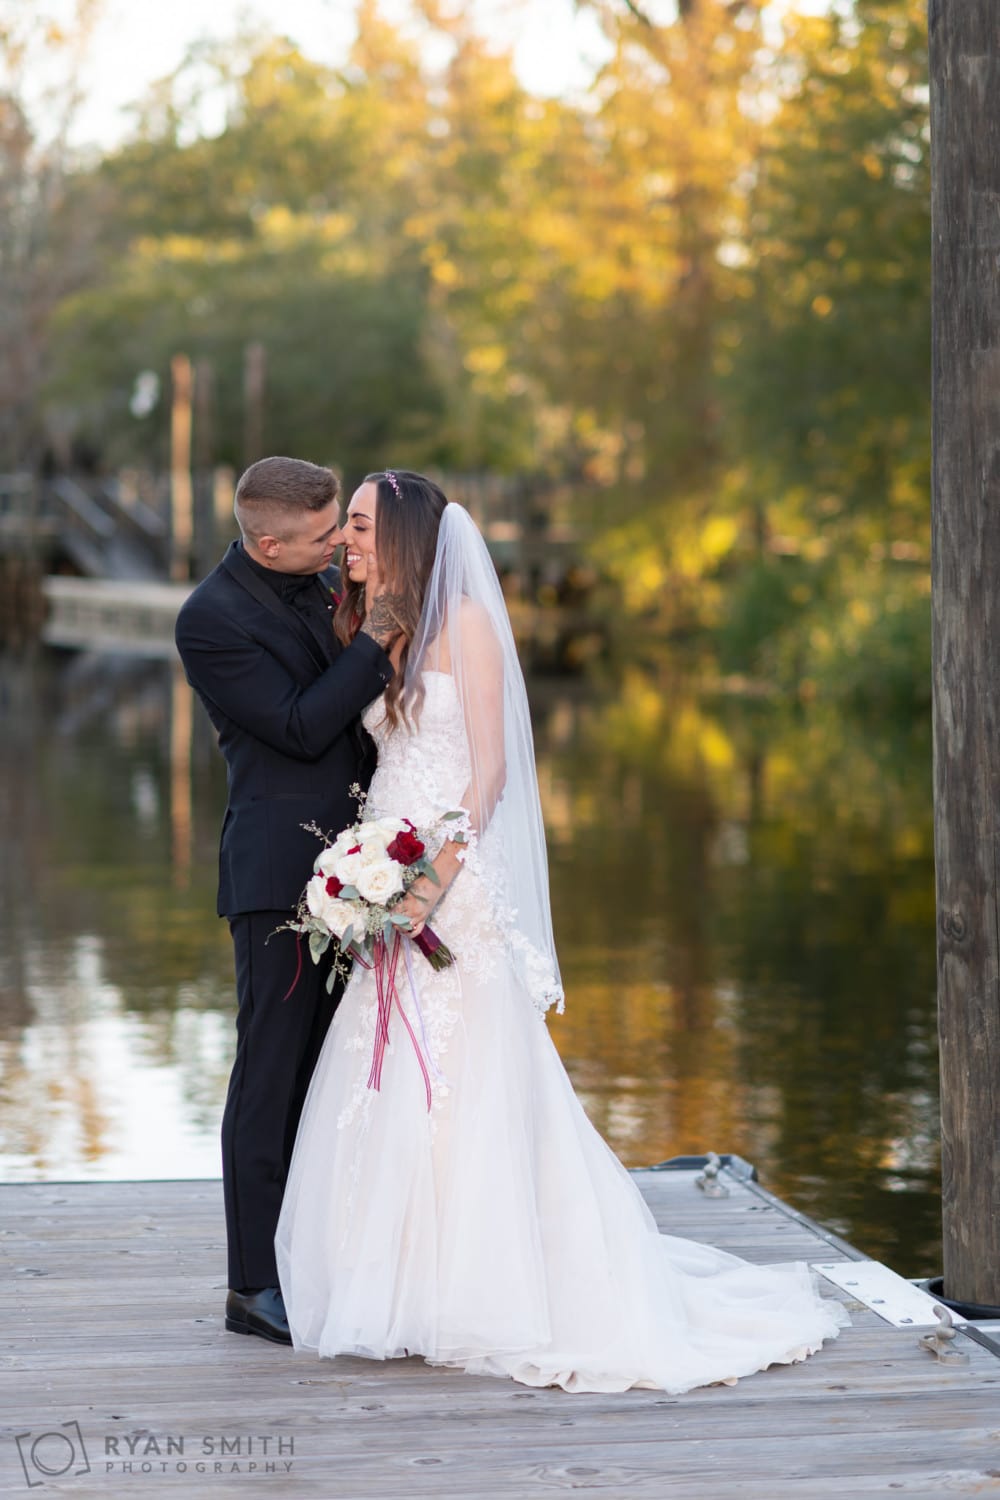 Bride and groom embracing on the dock by the water - Conway River Walk